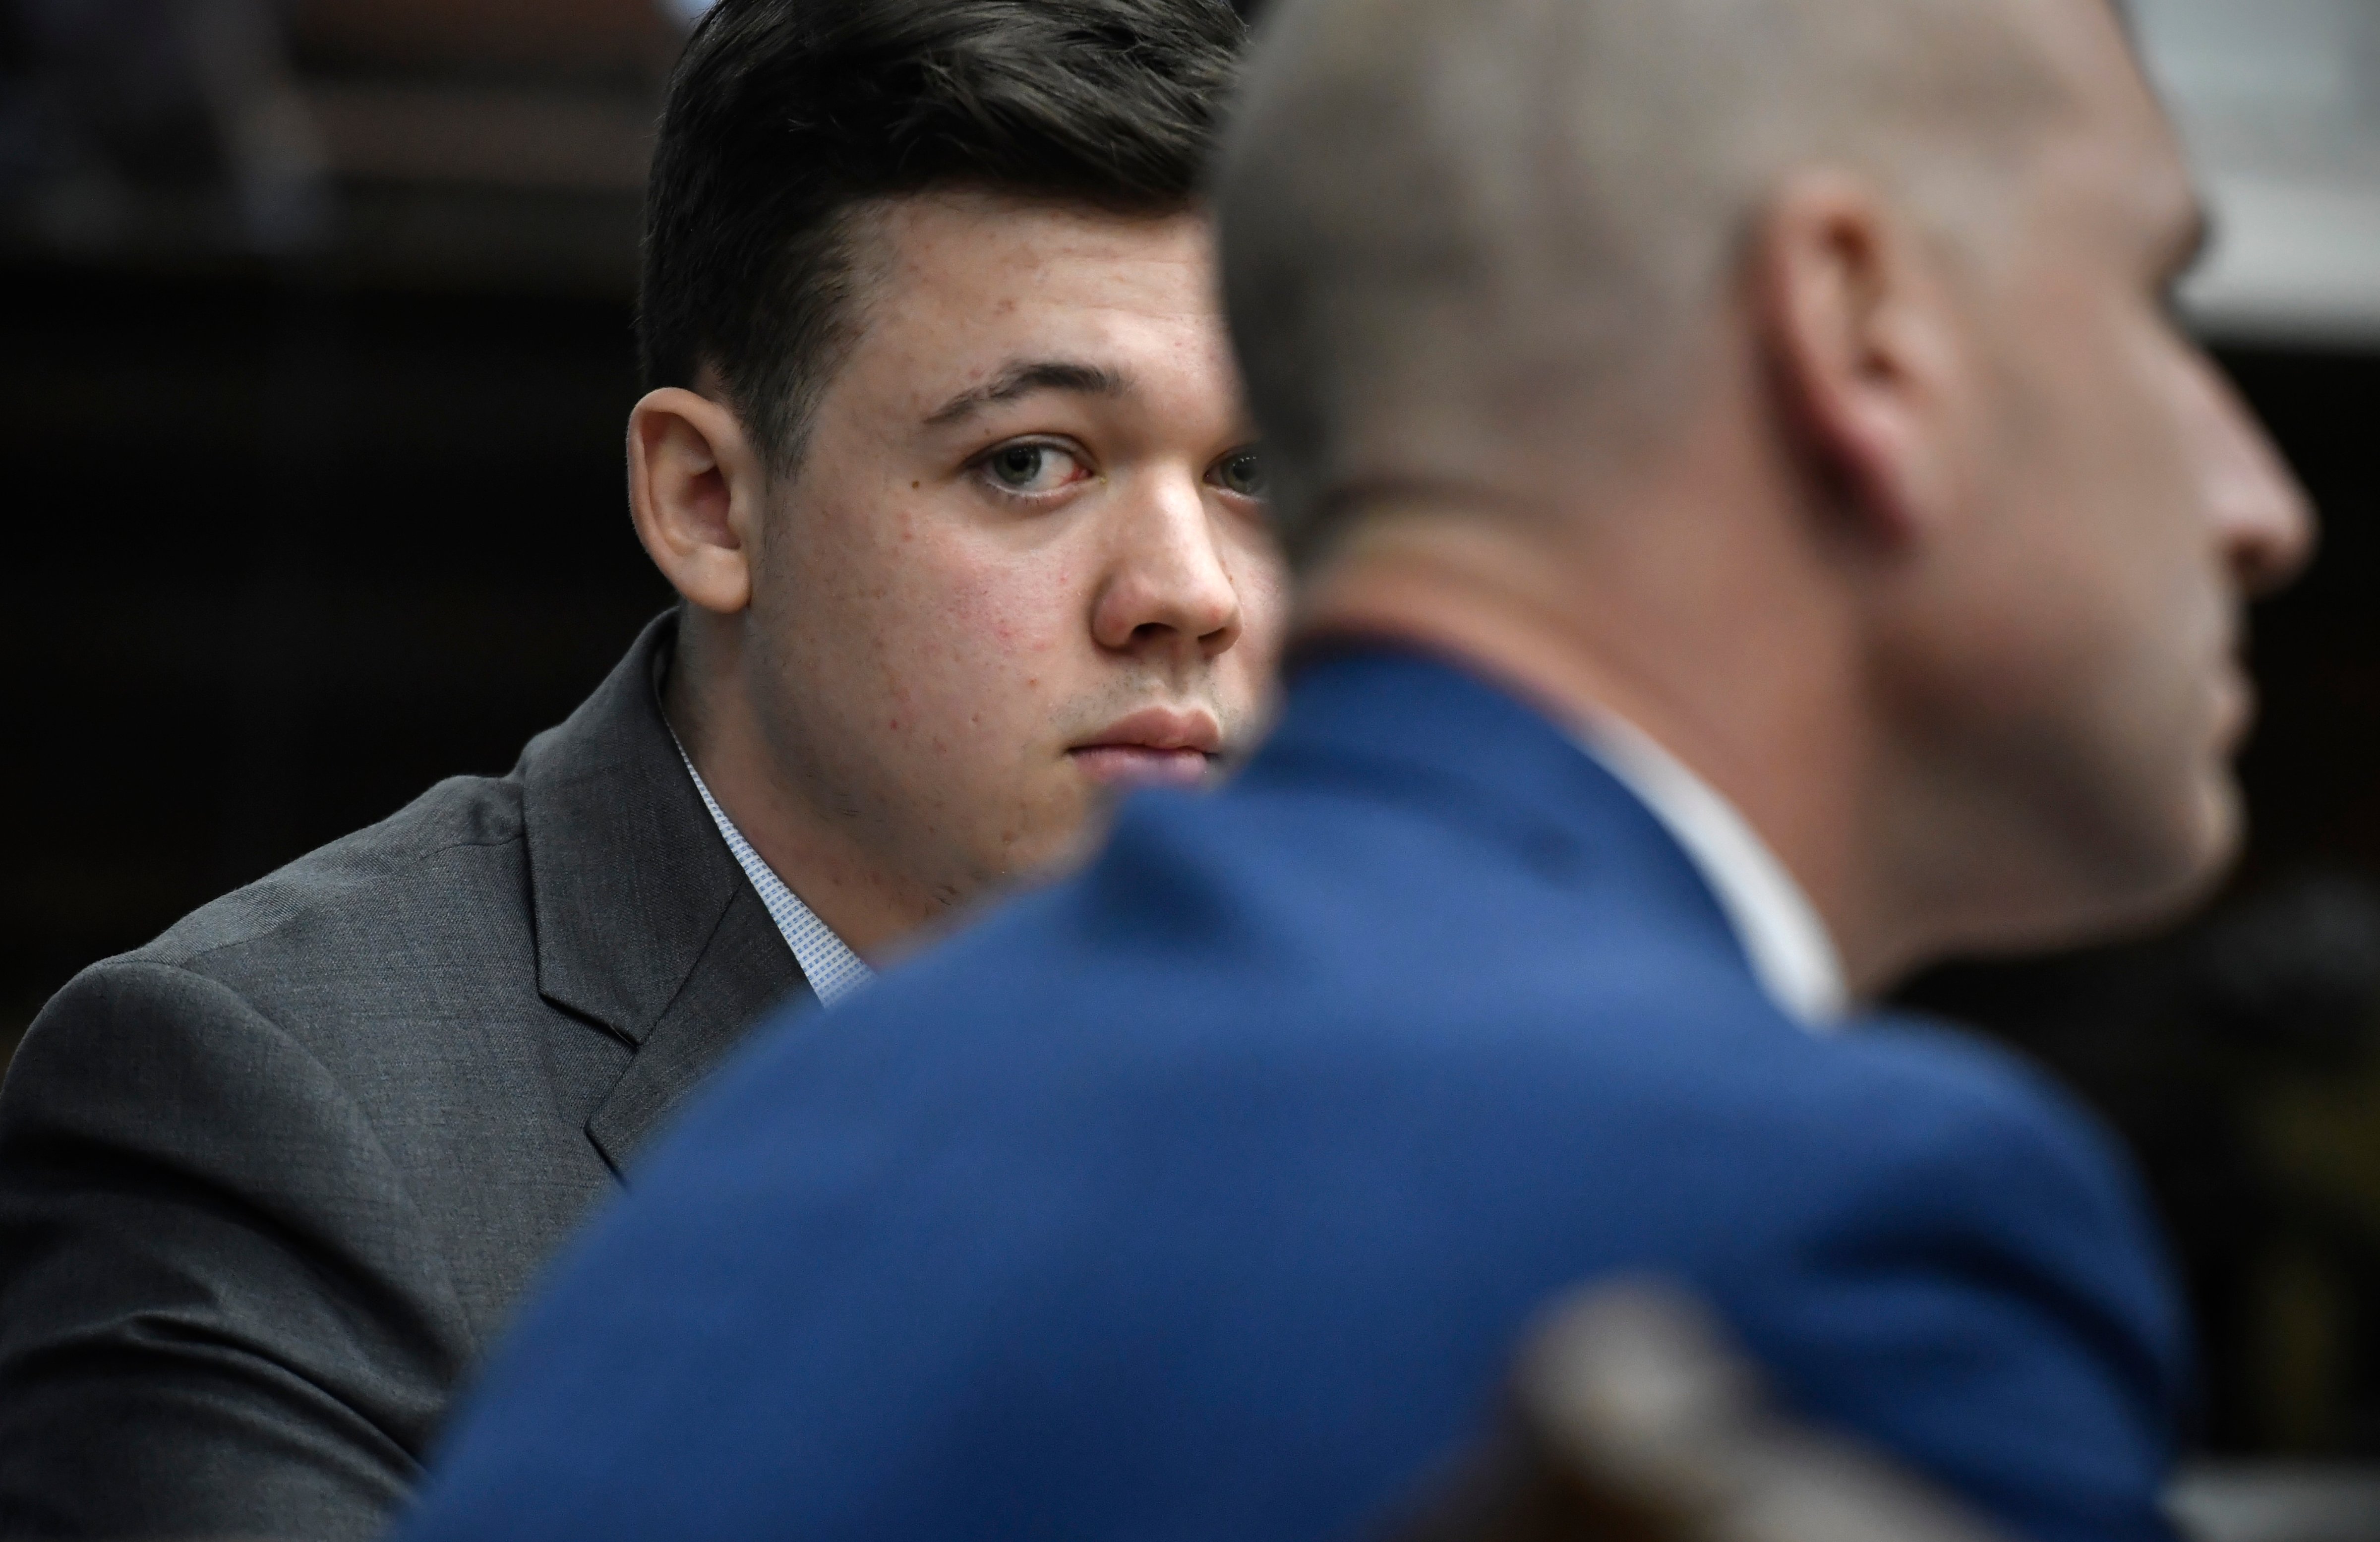 Kyle Rittenhouse listens as the Judge Bruce Schroeder talks about jury deliberations on Nov. 17, 2021 in Kenosha, Wisconsin. (Sean Krajacic—Pool/Getty Images)